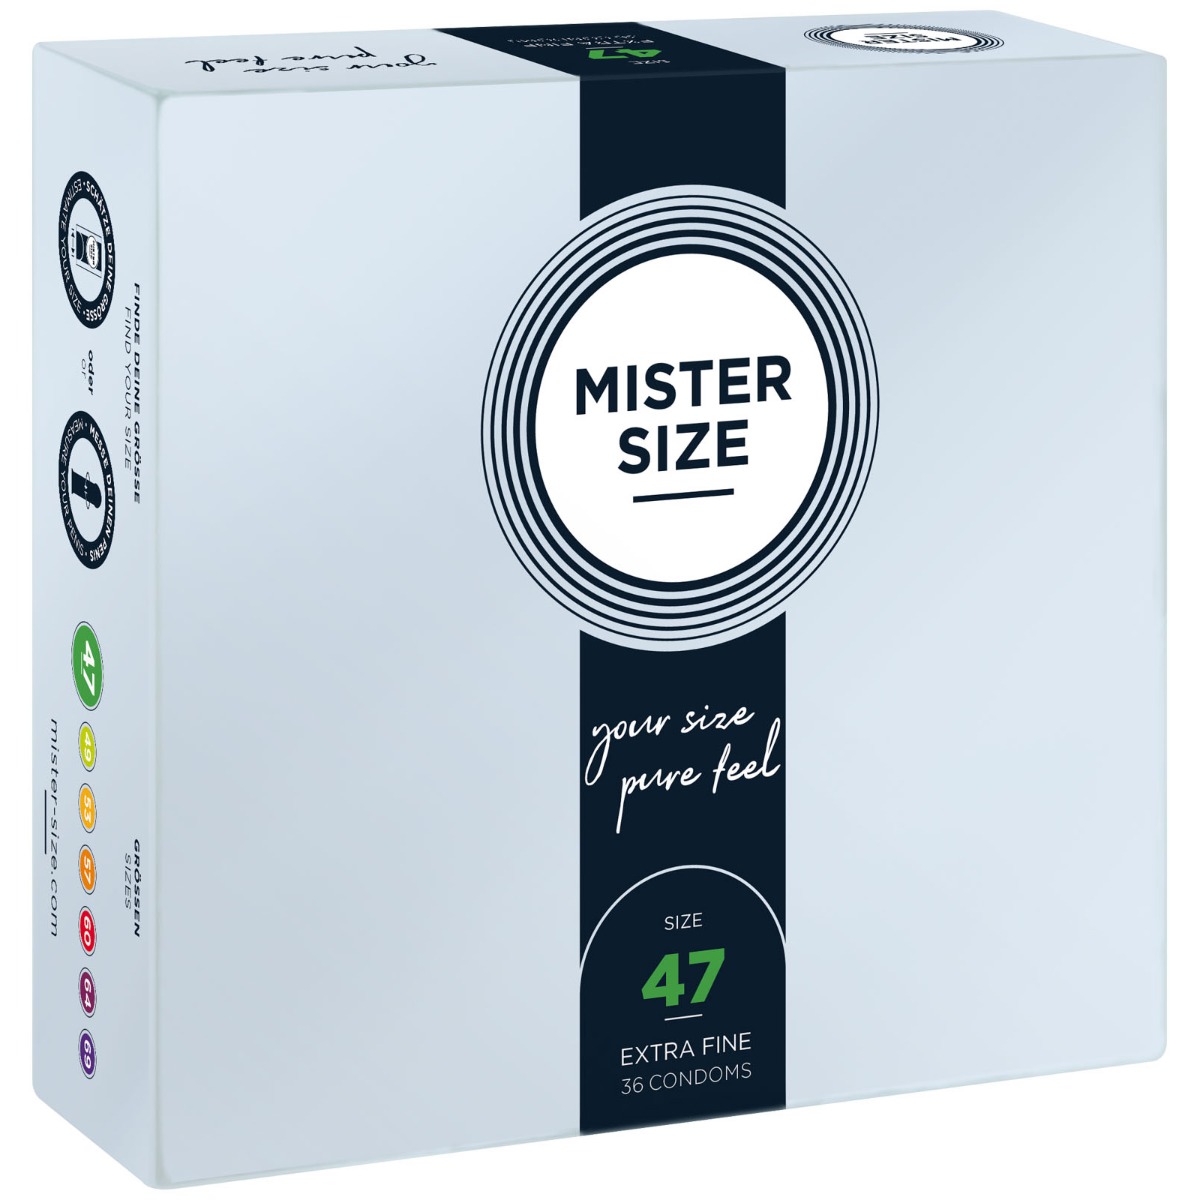 MISTER SIZE - pure feel Condoms - size 47 mm (36 pack)